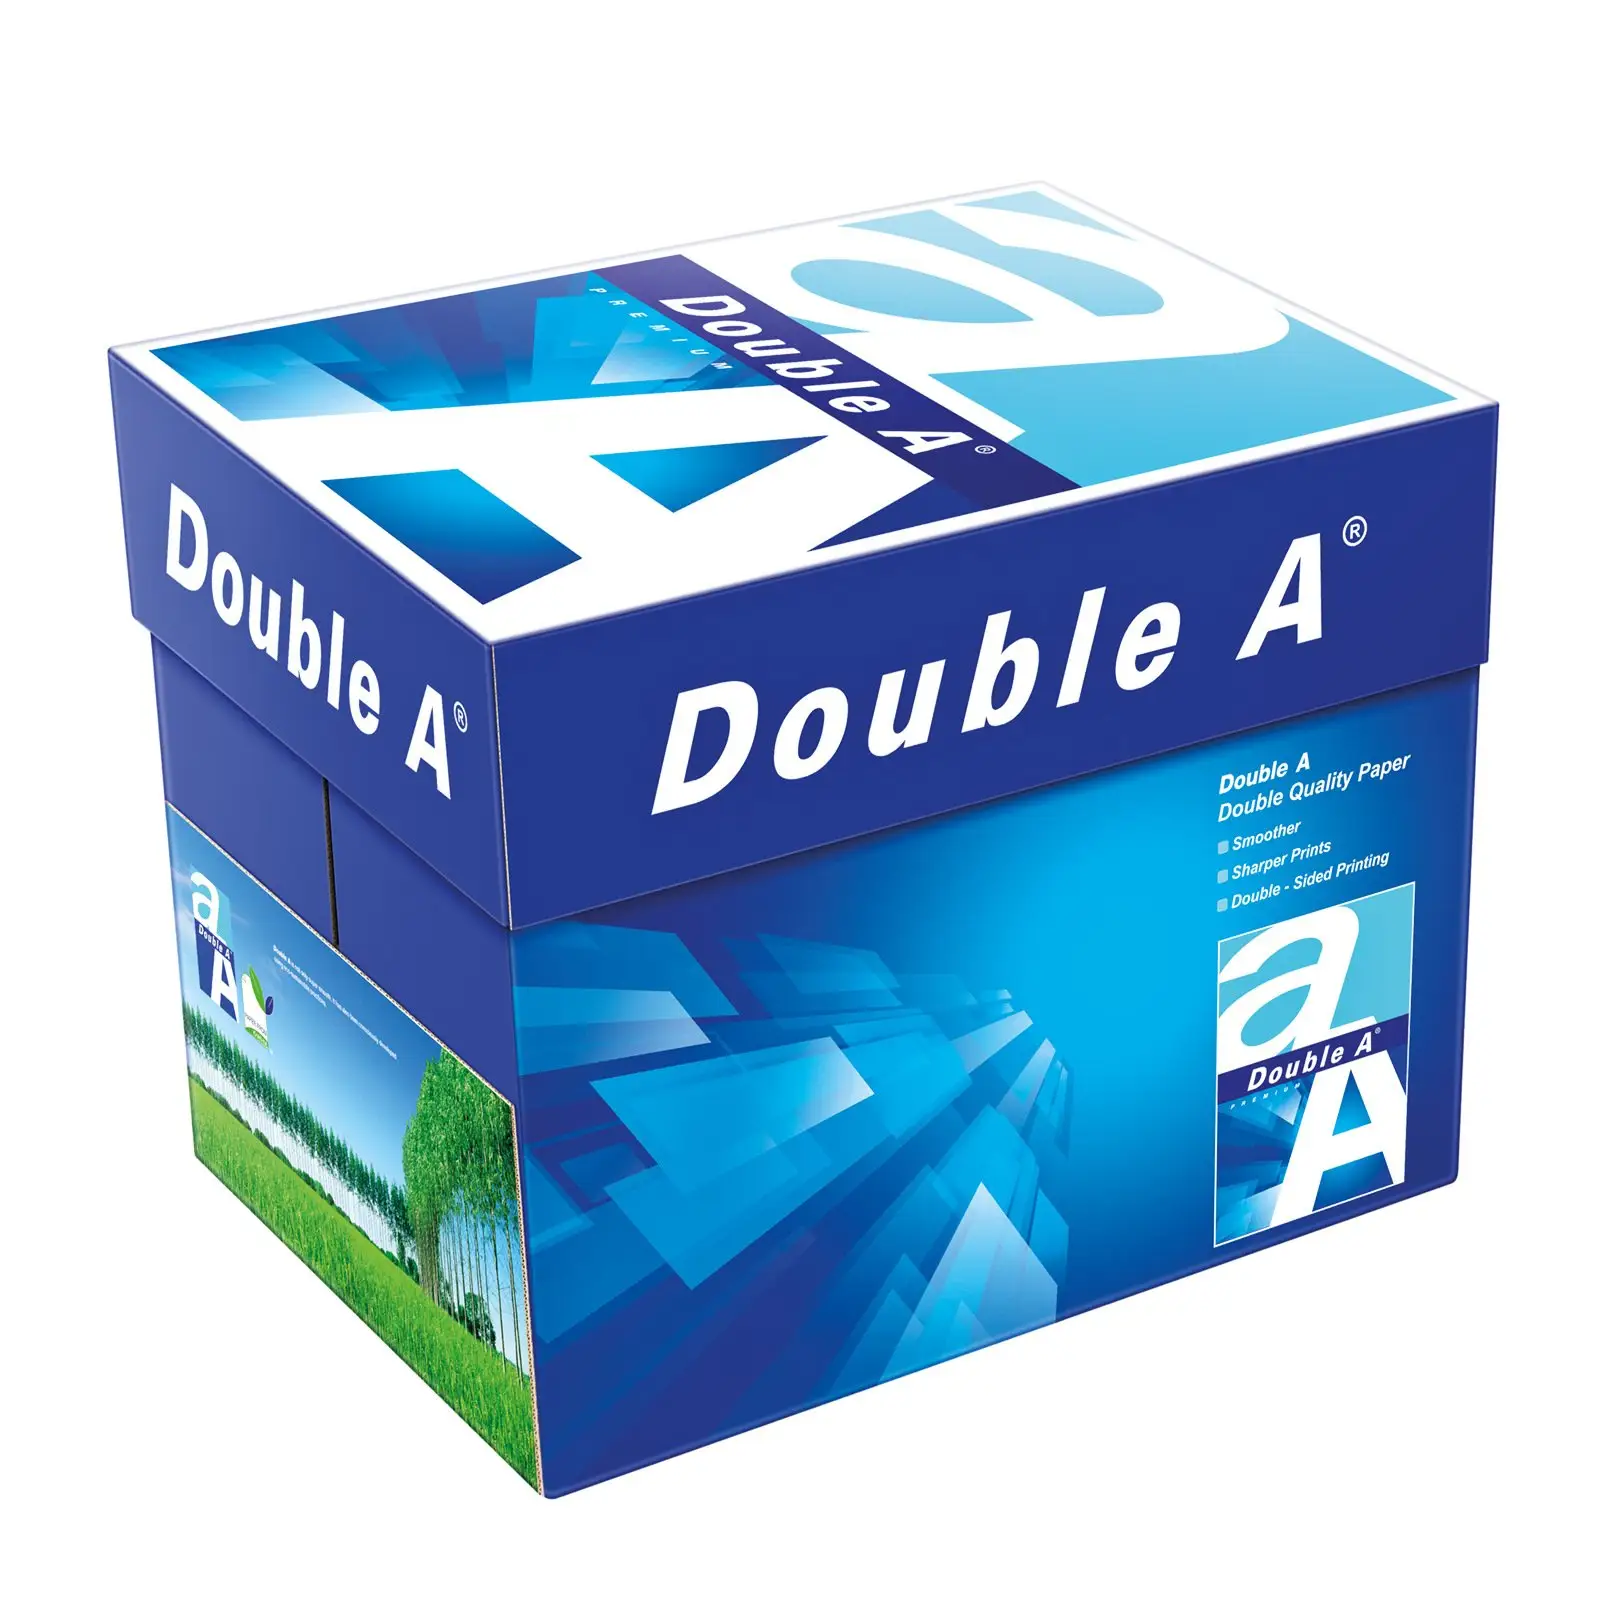 Computer Top Grade A4 Copy Paper Cheap A4 Copy Paper Office Printing Paper 80gsm Double a White Colored 70g AL